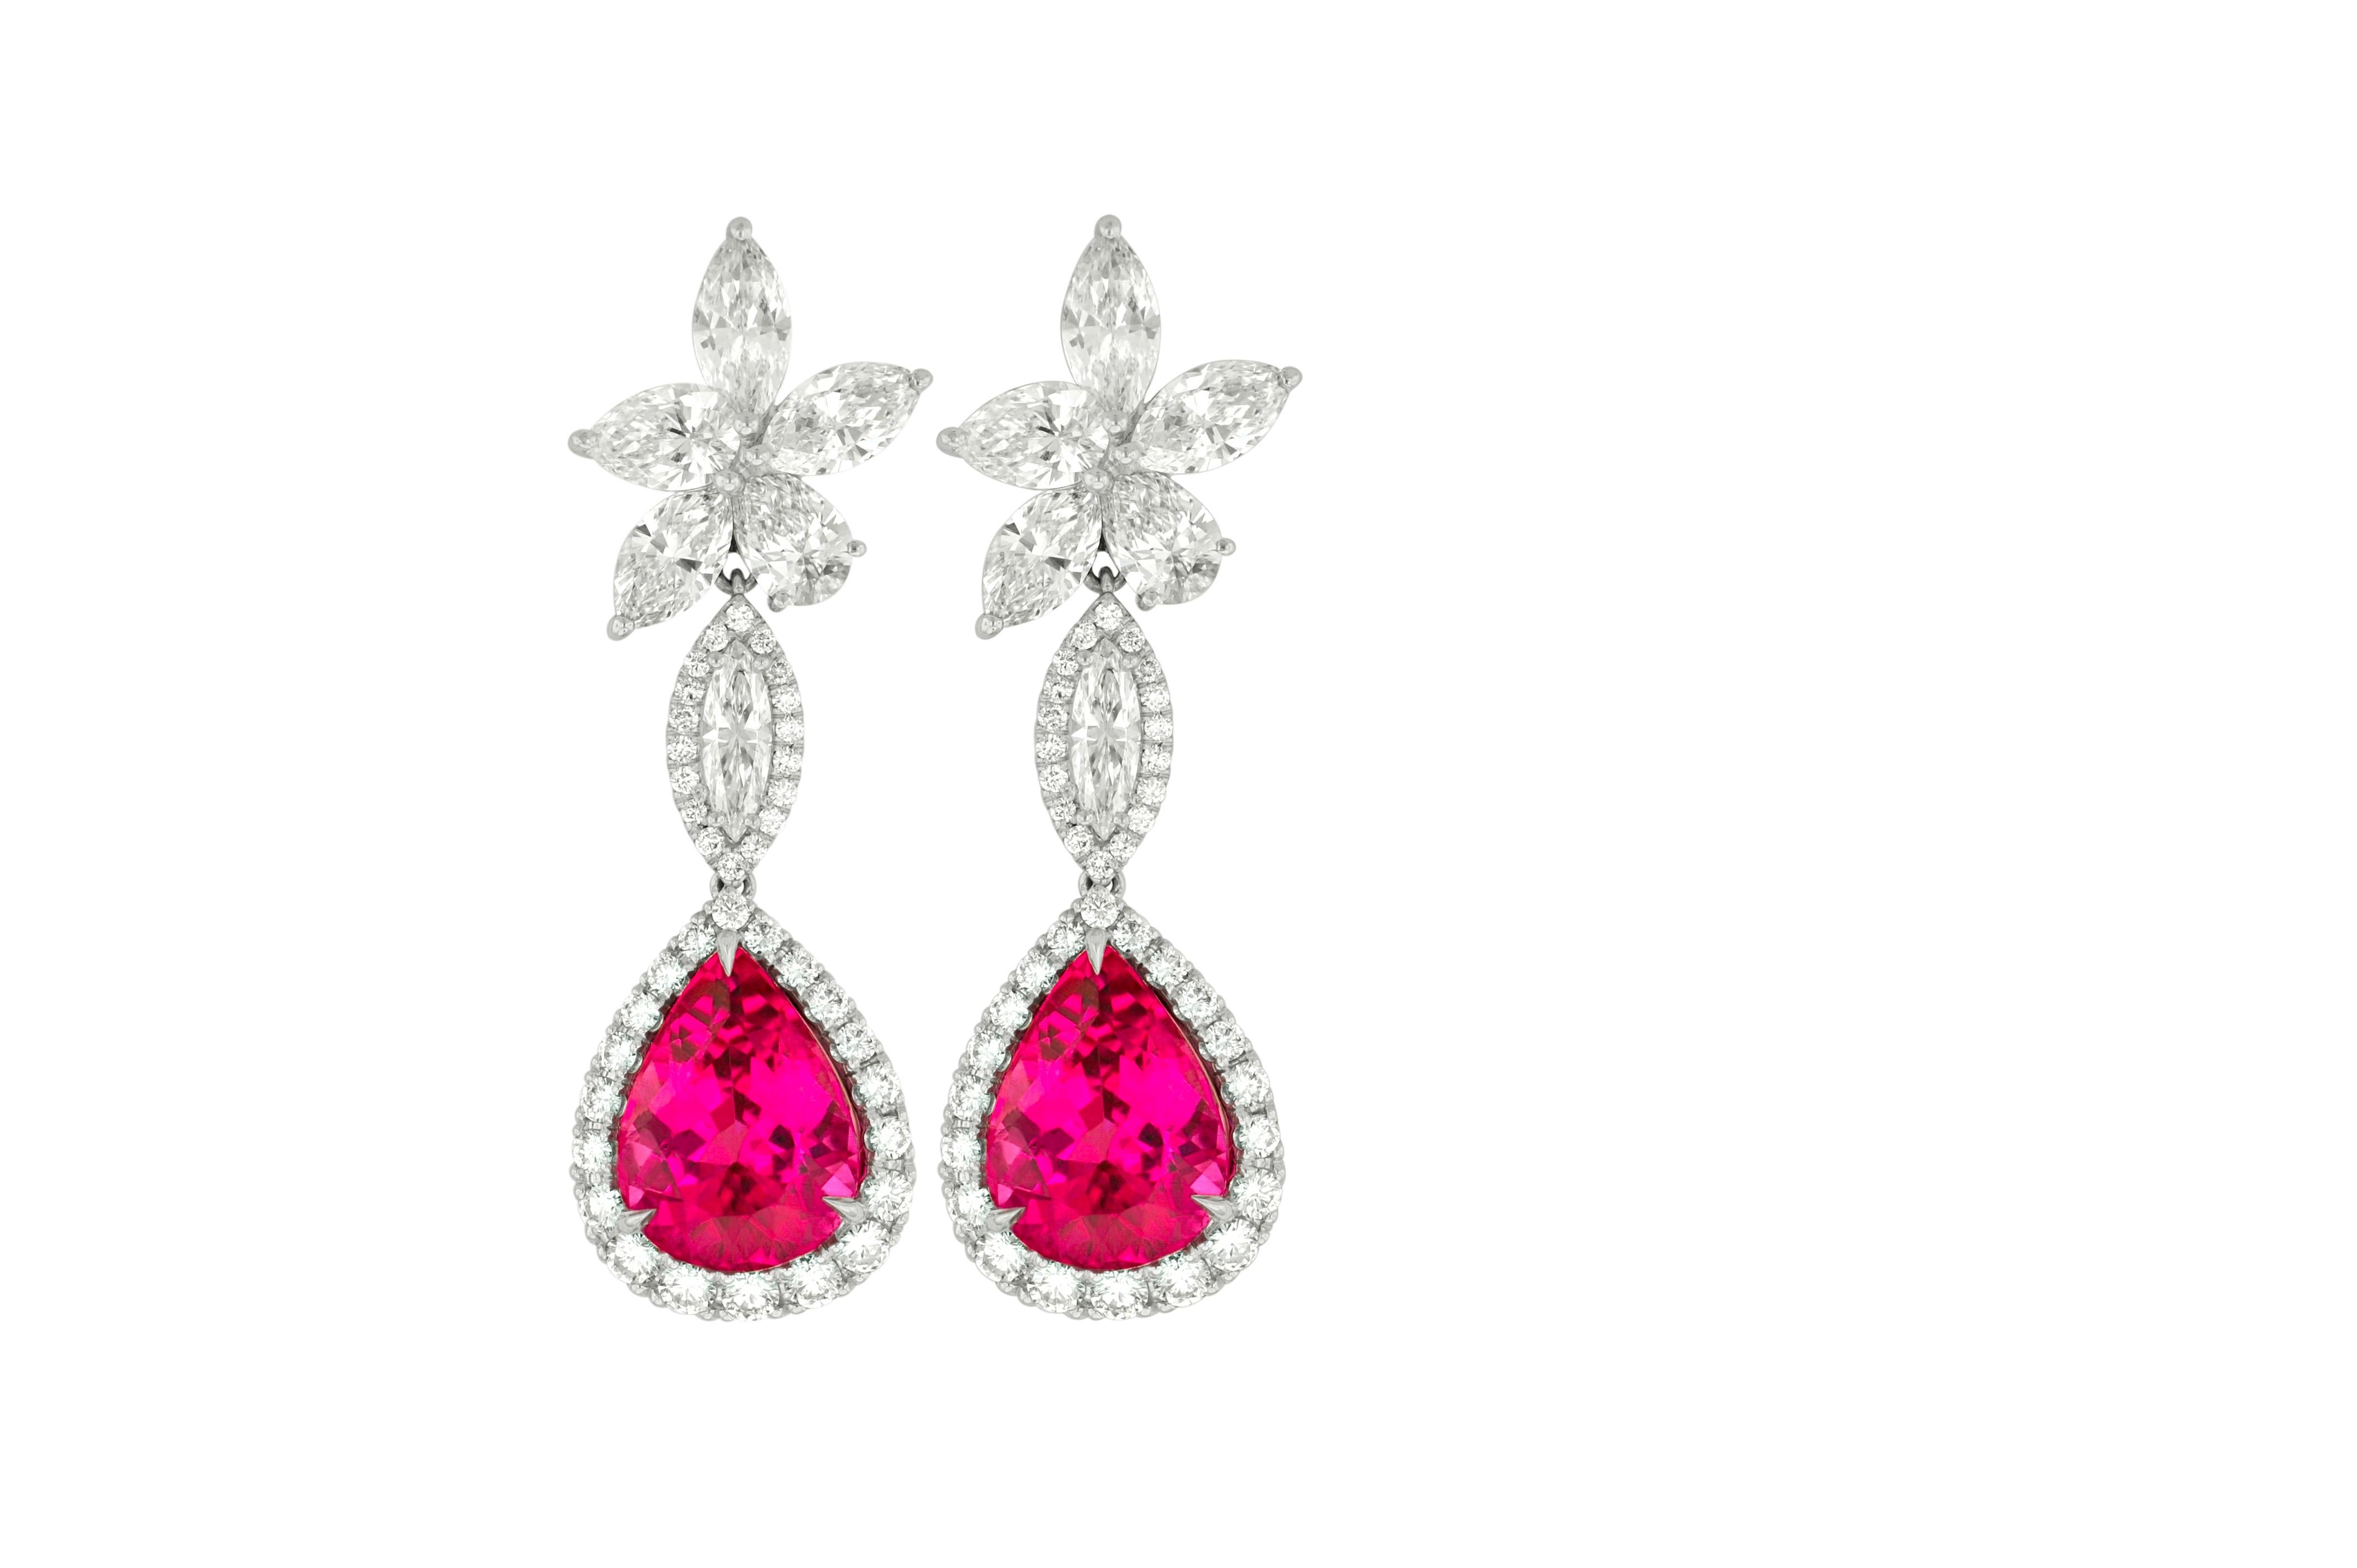 18kt white gold cluster pink tourmaline and diamonds earrings, features 12.70 (6.02+6.68ct) of two pink tourmalines and 10.15ct of 6 mq & rd diamonds.
